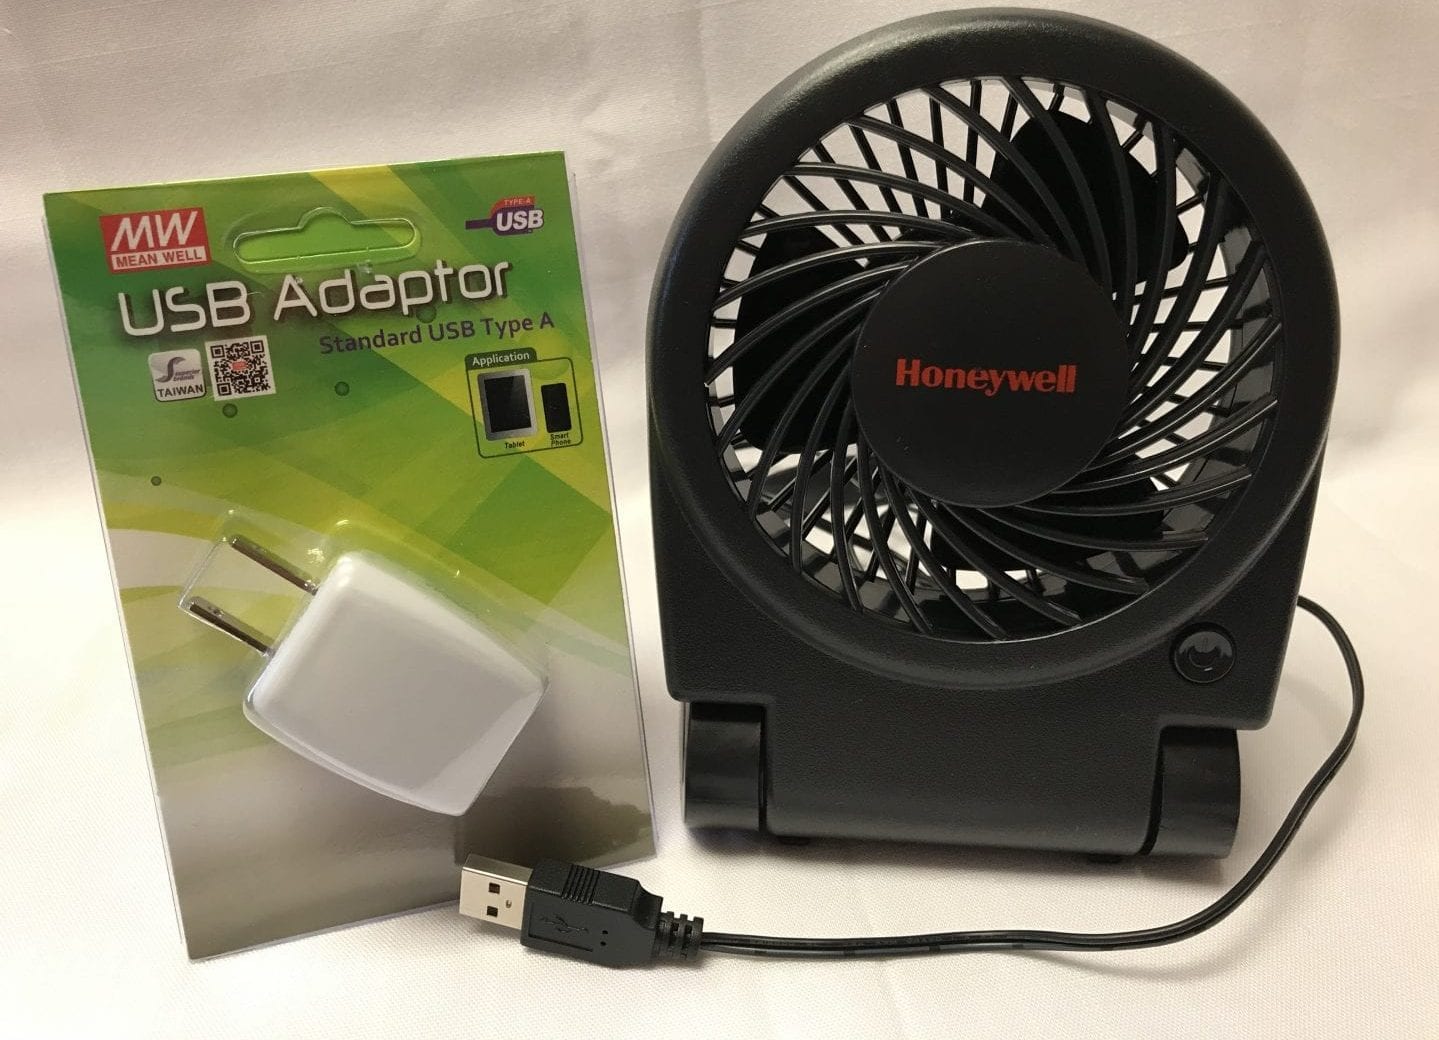 turbo fan, usb cable, and plug adapter